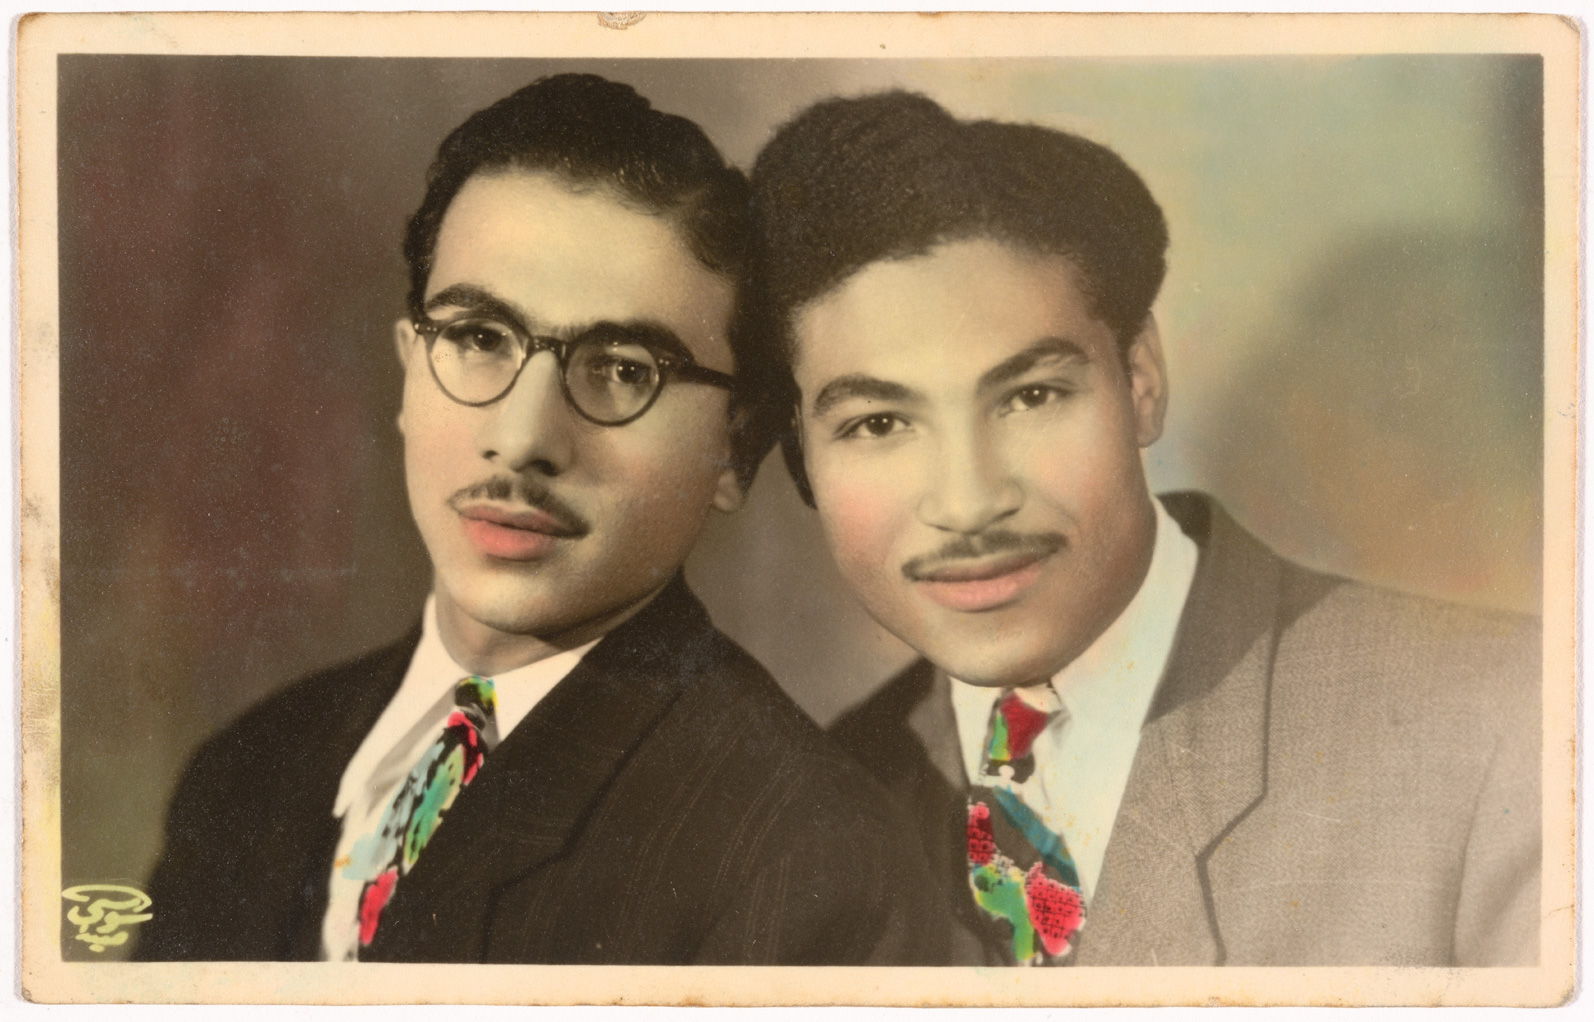 Hand-coloured portrait of Hussein and Ahmed Assad by Anis el Soussi in Lebanon, January 1, 1946, gelatin silver developing-out paper print. Fahime Zeidan Collection, courtesy of the Arab Image Foundation